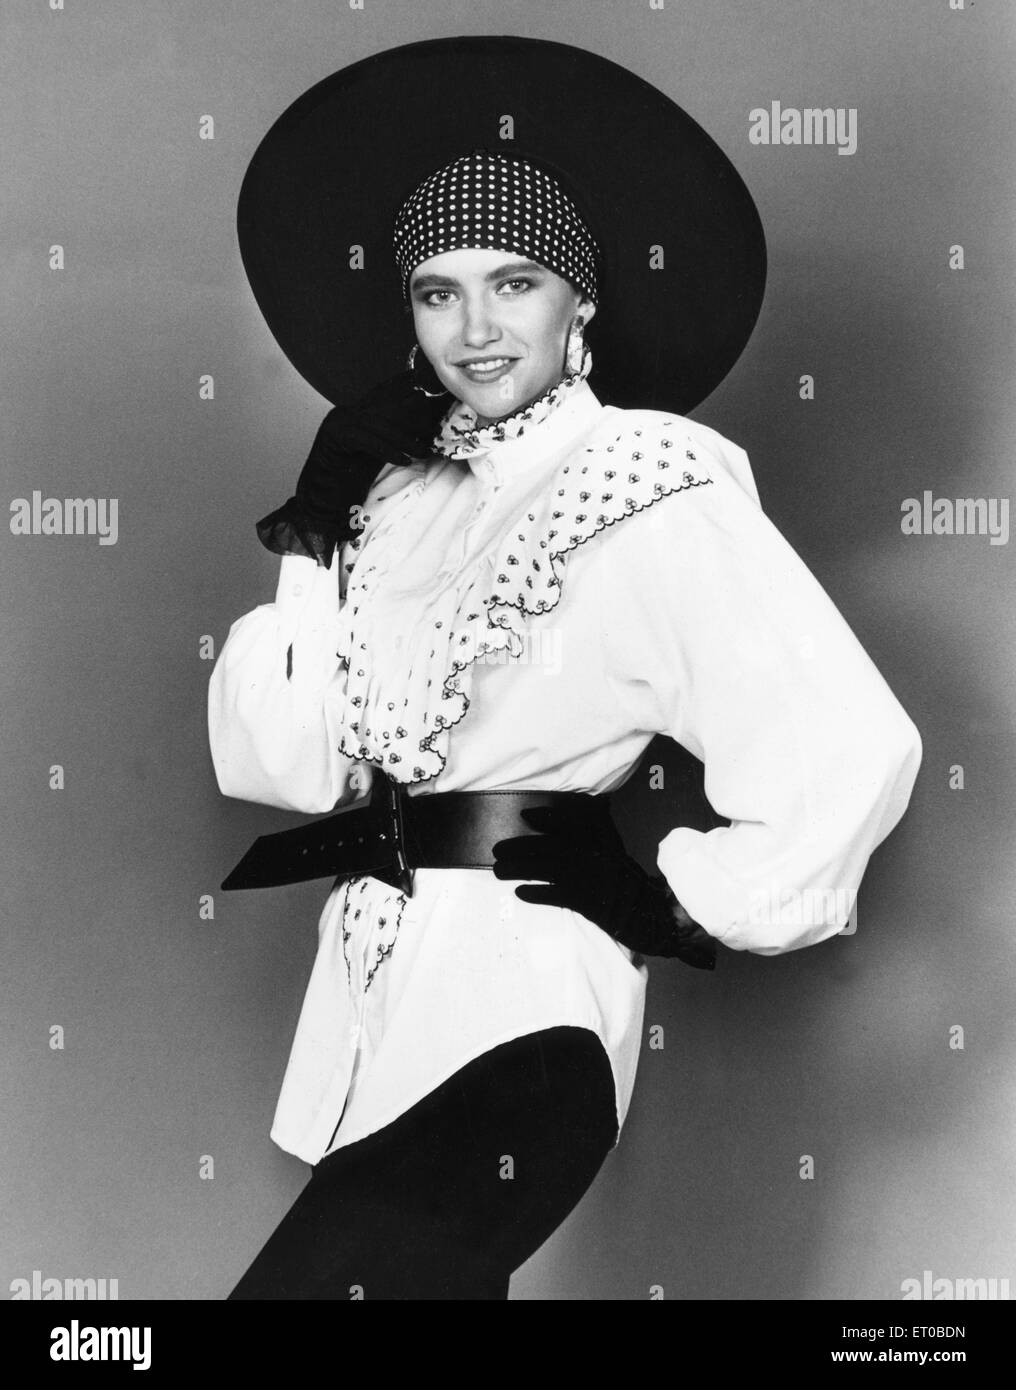 1980s Women's Fashion: Our model wears. White frill belted blouse black leggings, gloves, and wide brimmed hat. 7th August 1989 Stock Photo